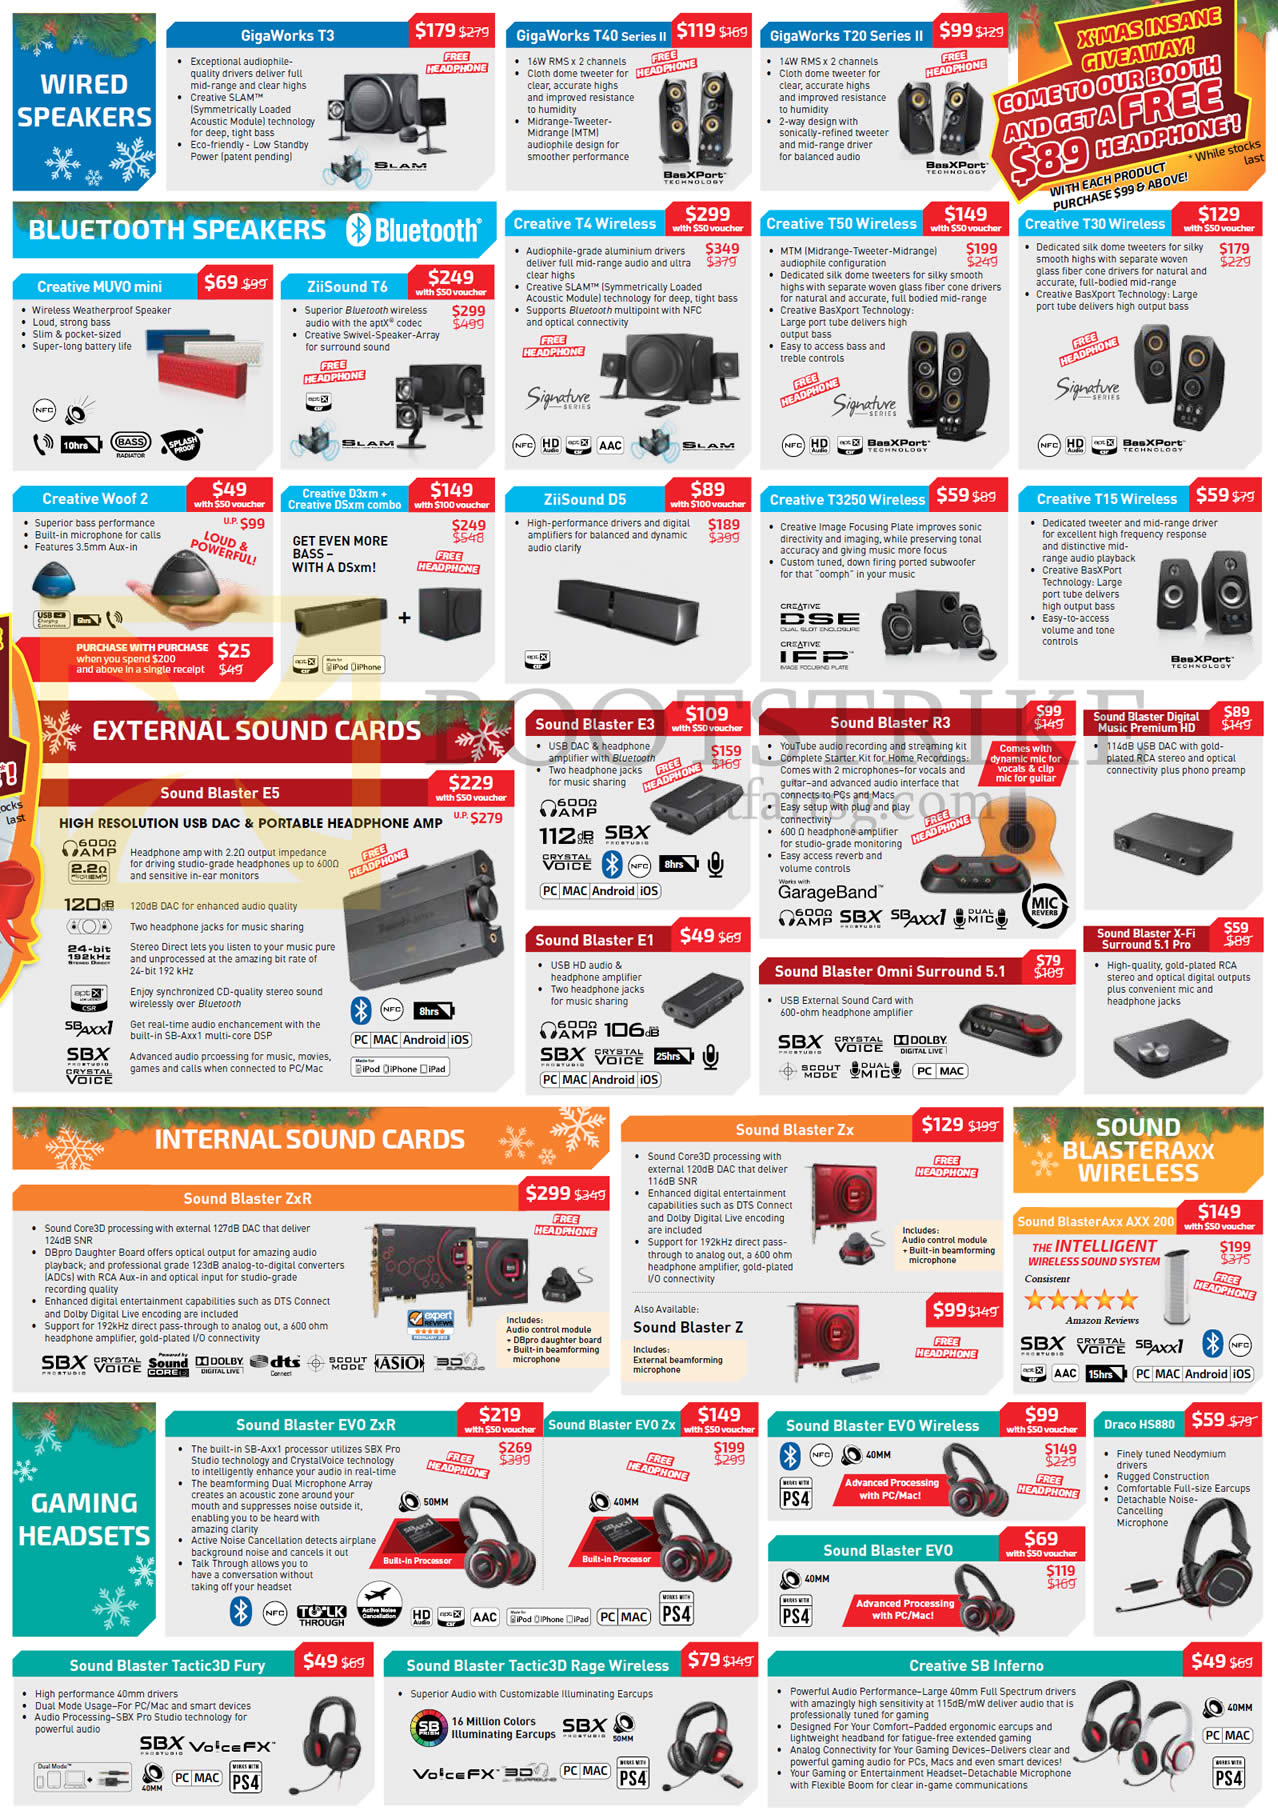 SITEX 2015 price list image brochure of Creative Wired Speakers, Internal, External Sound Cards, Sound Blaster Axx Wireless, Gaming Headsets